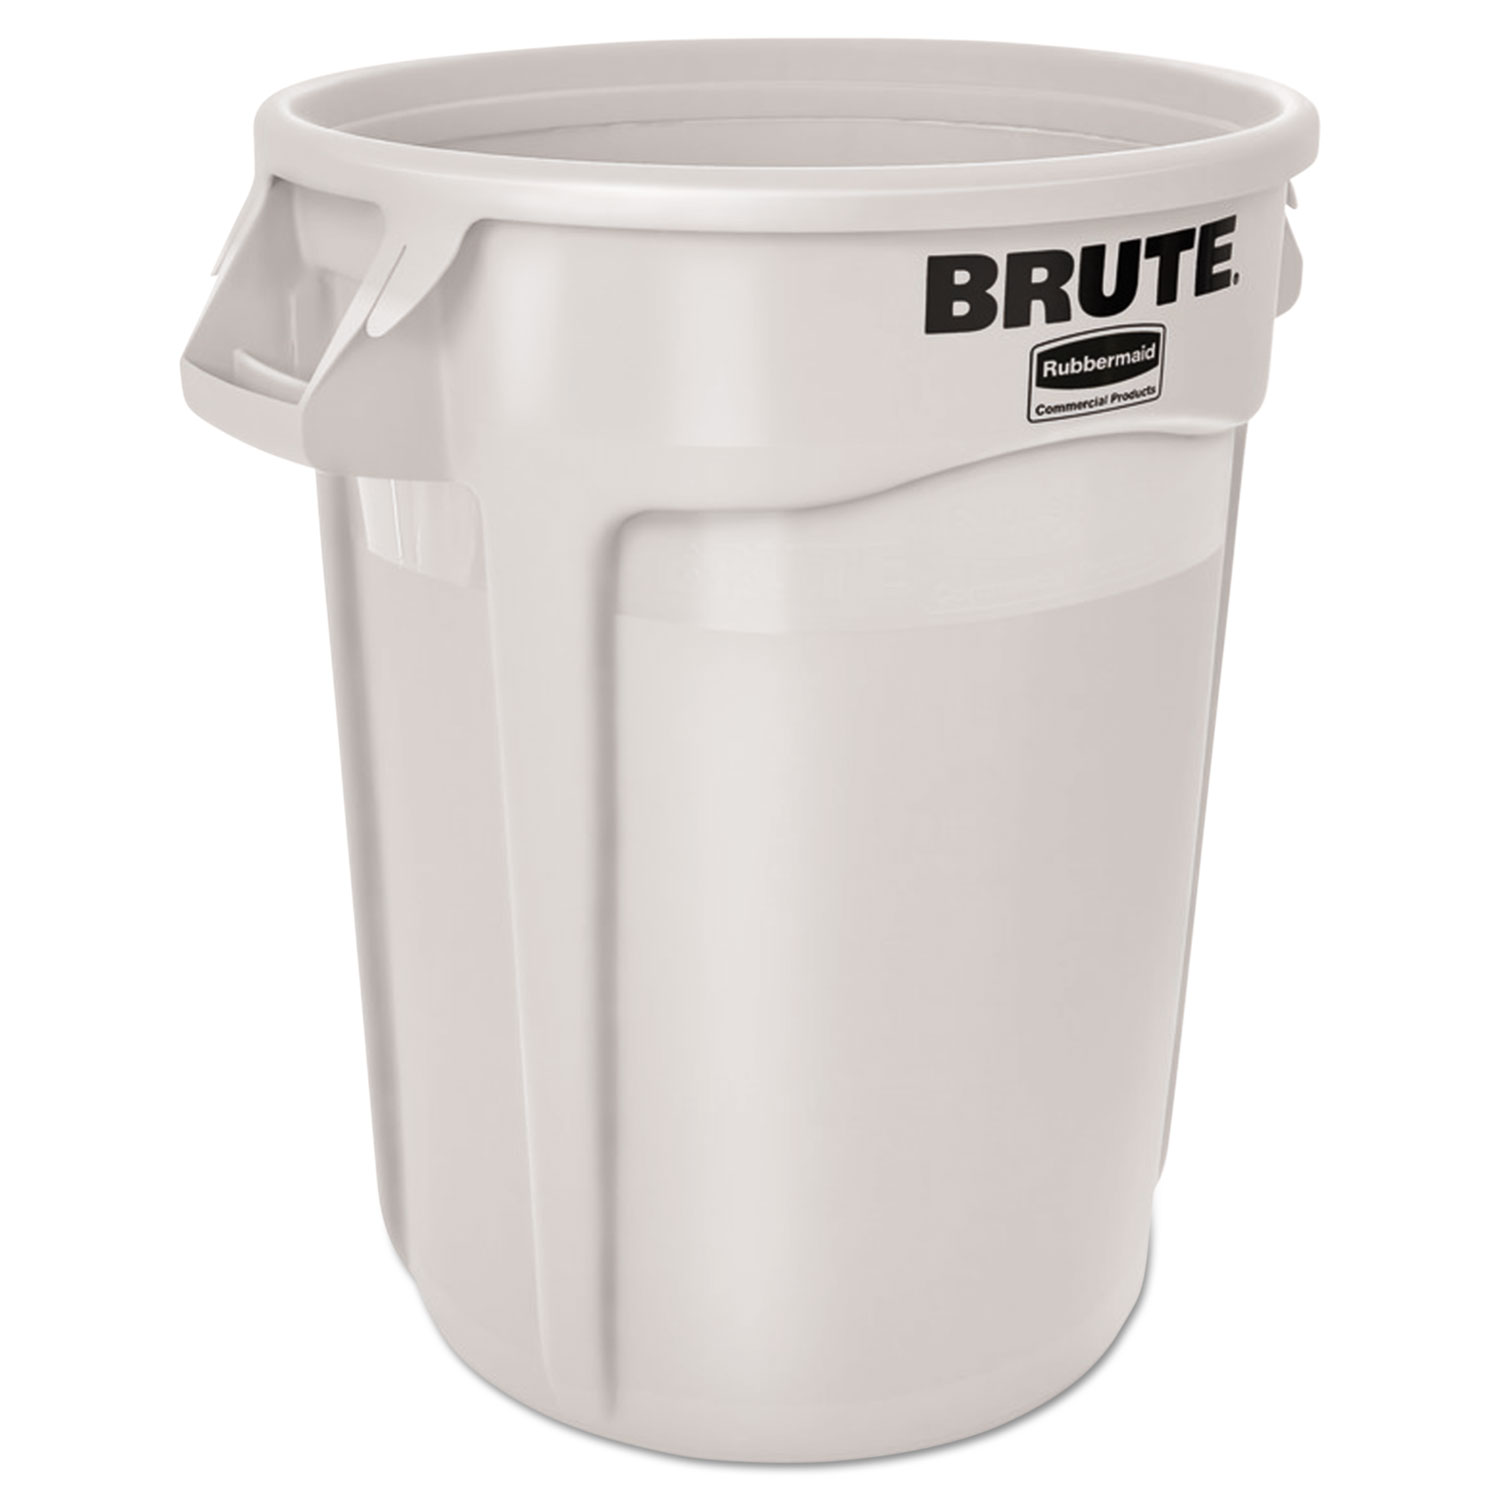  Rubbermaid Commercial FG265500WHT Vented Round Brute Container, 55 gal, White, Resin (RCP2655WHIEA) 